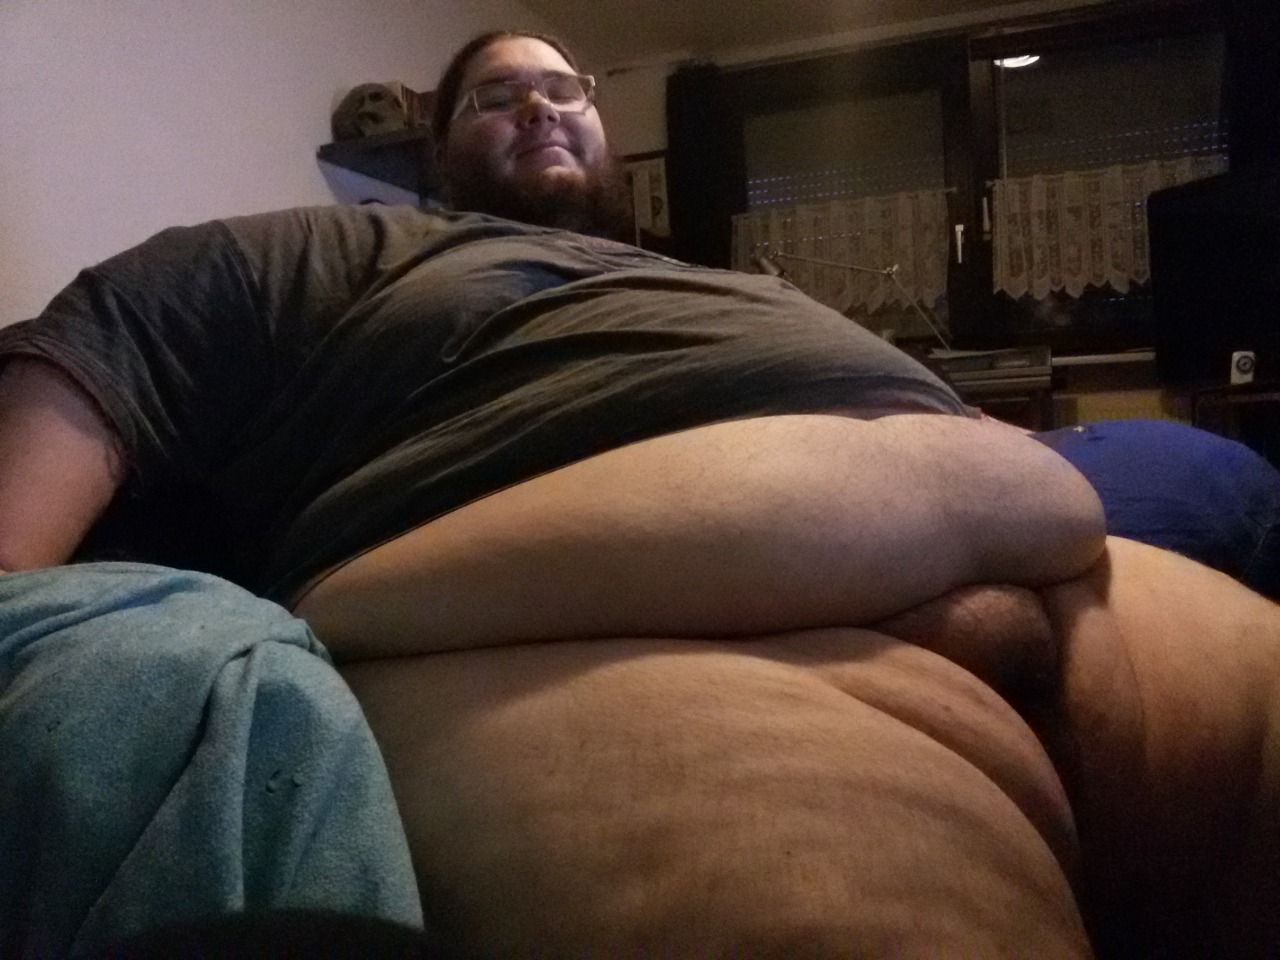 My girlfriend said i shoud show my current weight gain results. My biggest fat roll